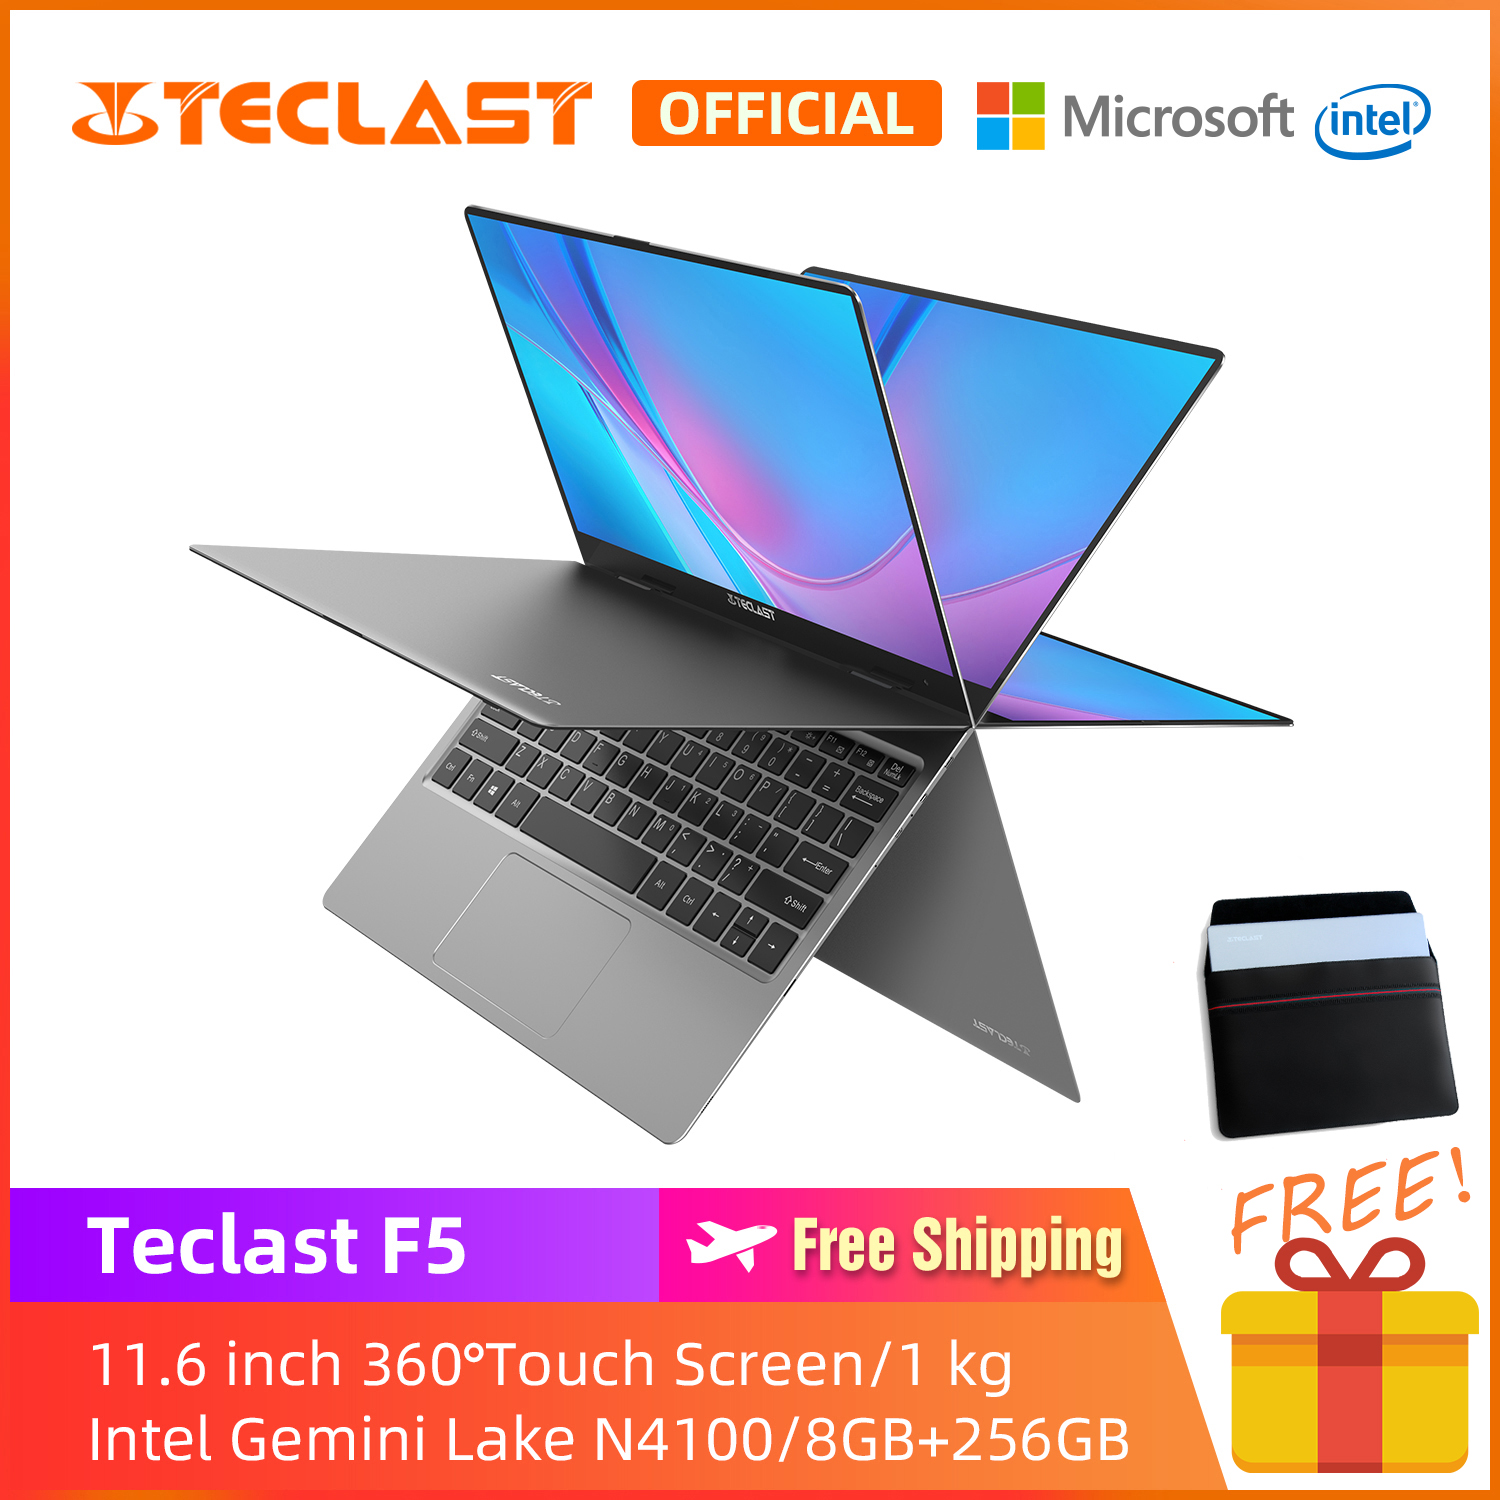 【Teclast Official】 F5 Traditional Laptop/11.6 inch  360° Rotating Touch Screen/Intel Gemini Lake N4100 CPU/1920X1080 Resolution/8GB+256GB SSD/1 kg Ultra-light/Dual Band WIFI